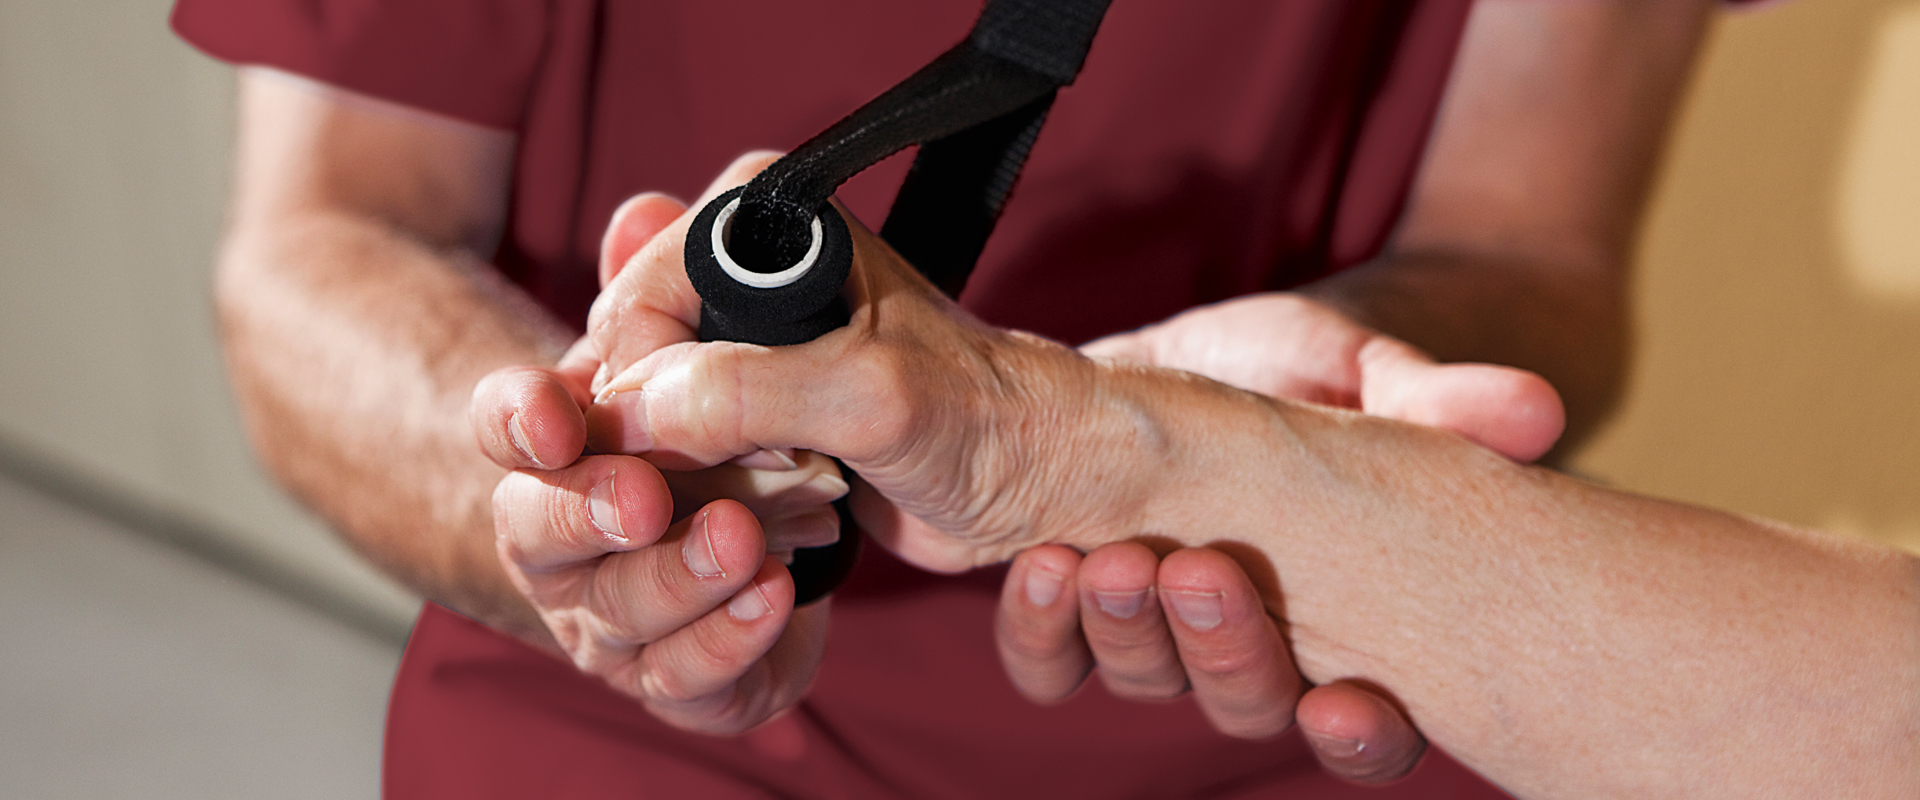 therapist and patients hands performing therapy exercise